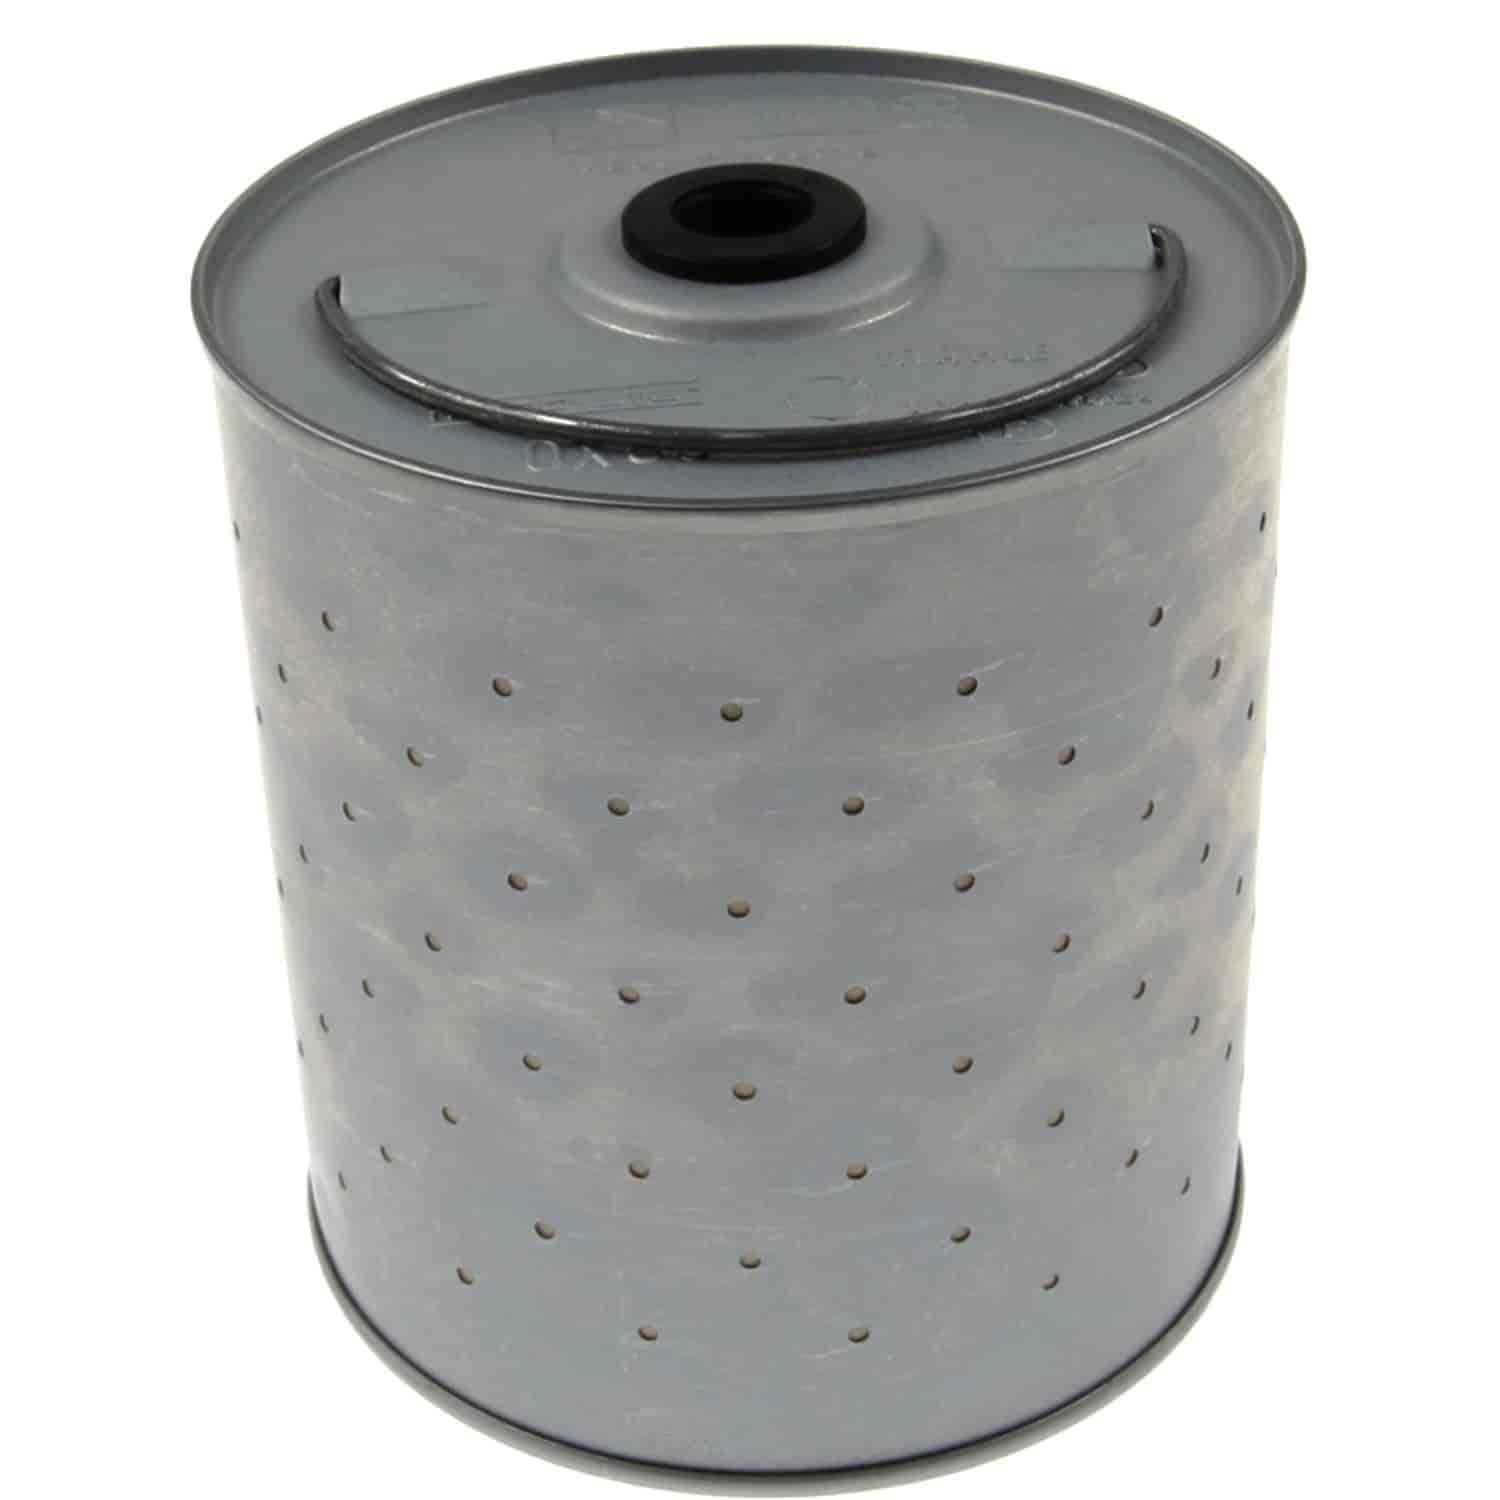 Mahle Oil Filter Mercedes Benz OM-Series engines and